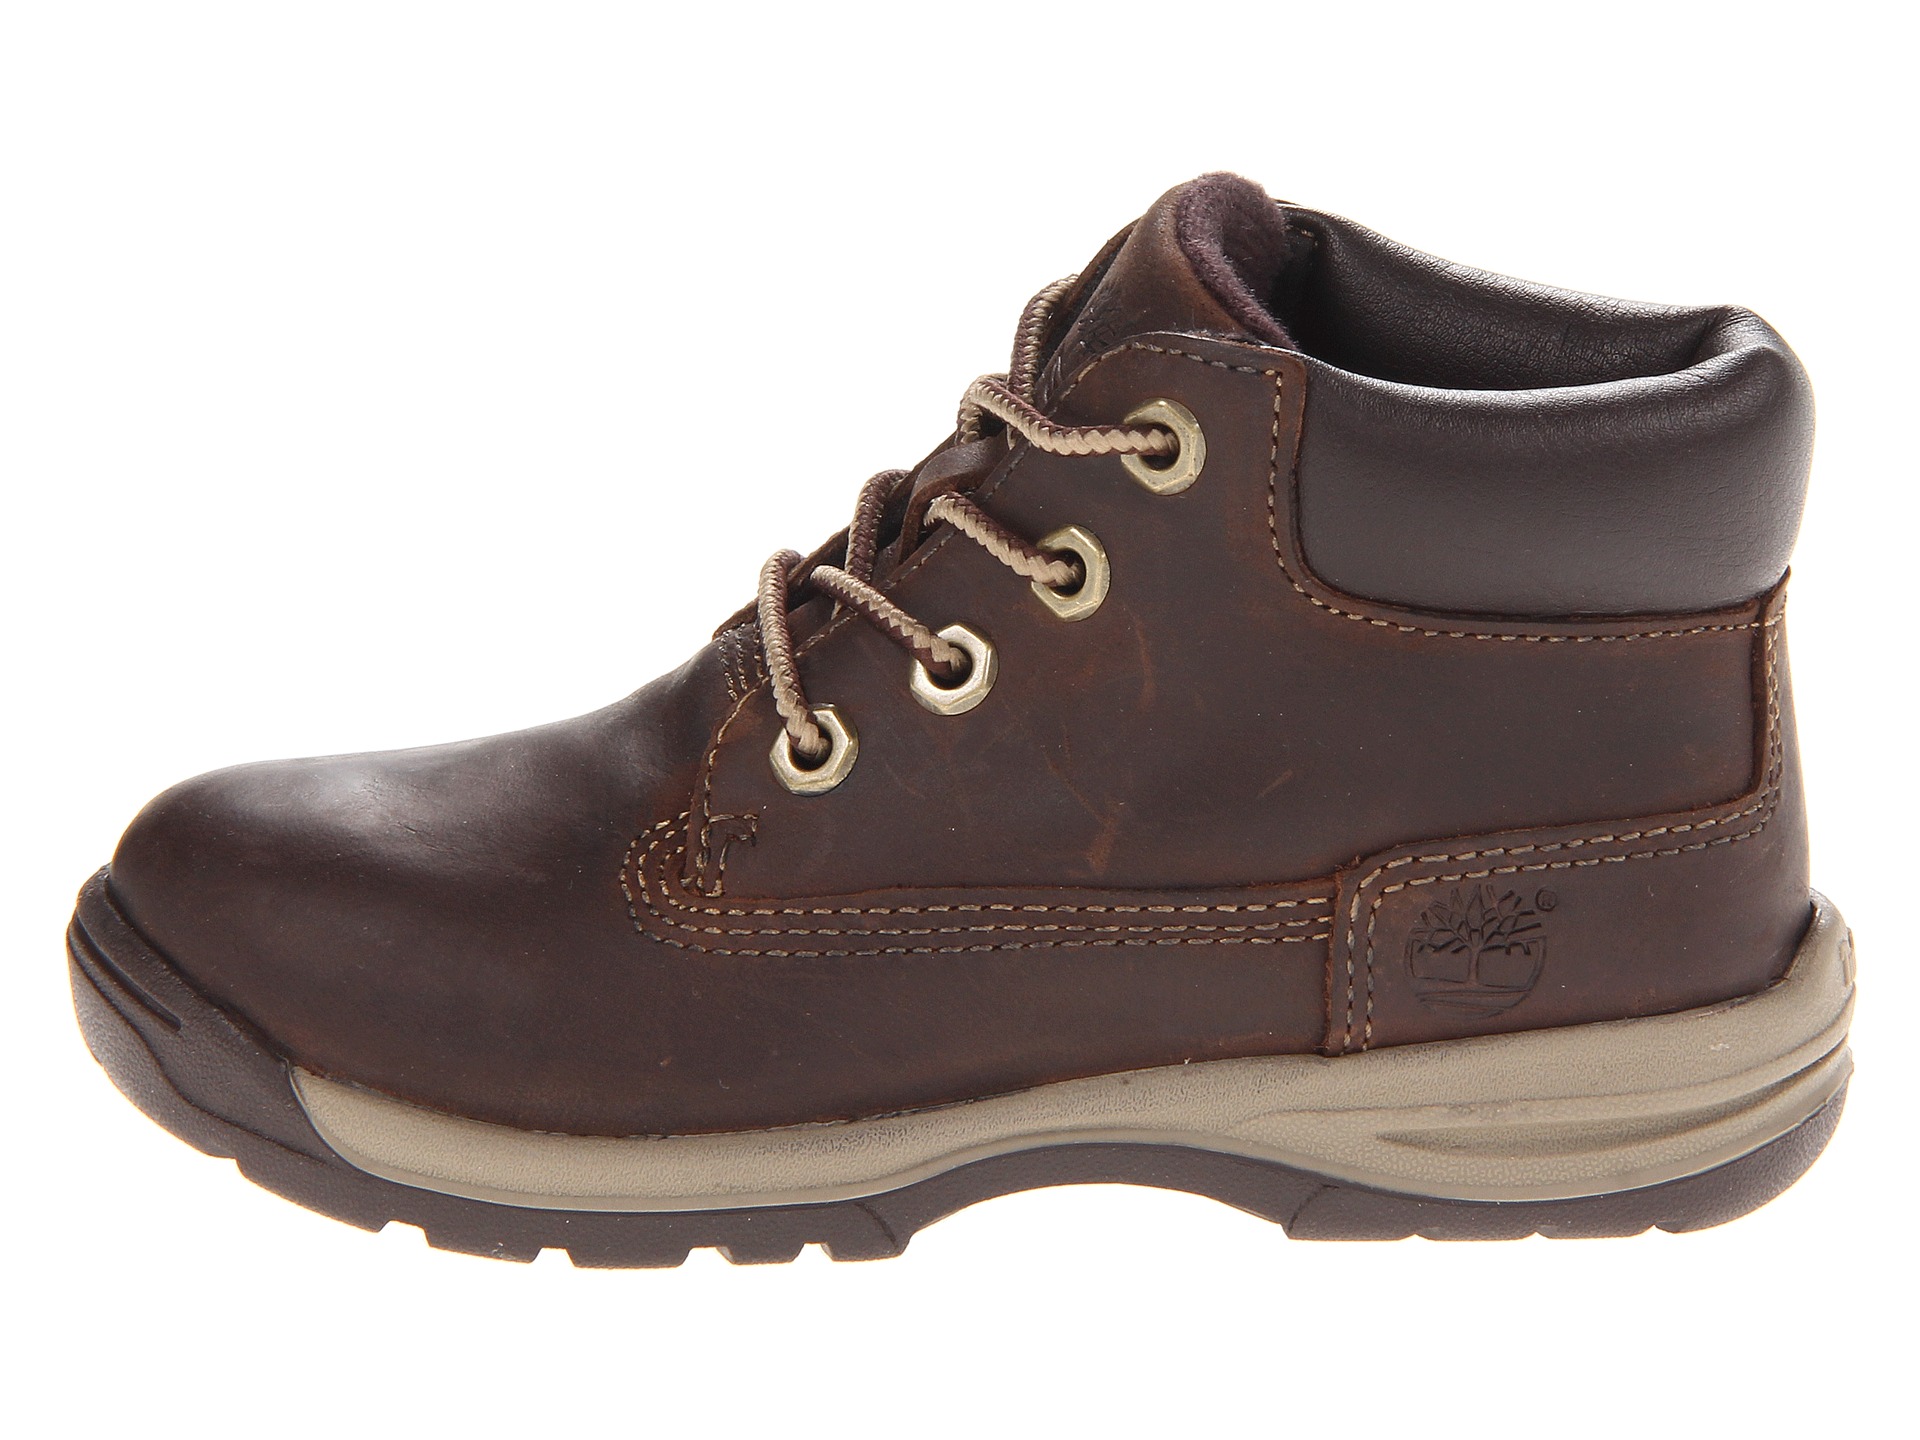 ... Timber Tykes Girls Lace Boot Toddler Brown | Shipped Free at Zappos